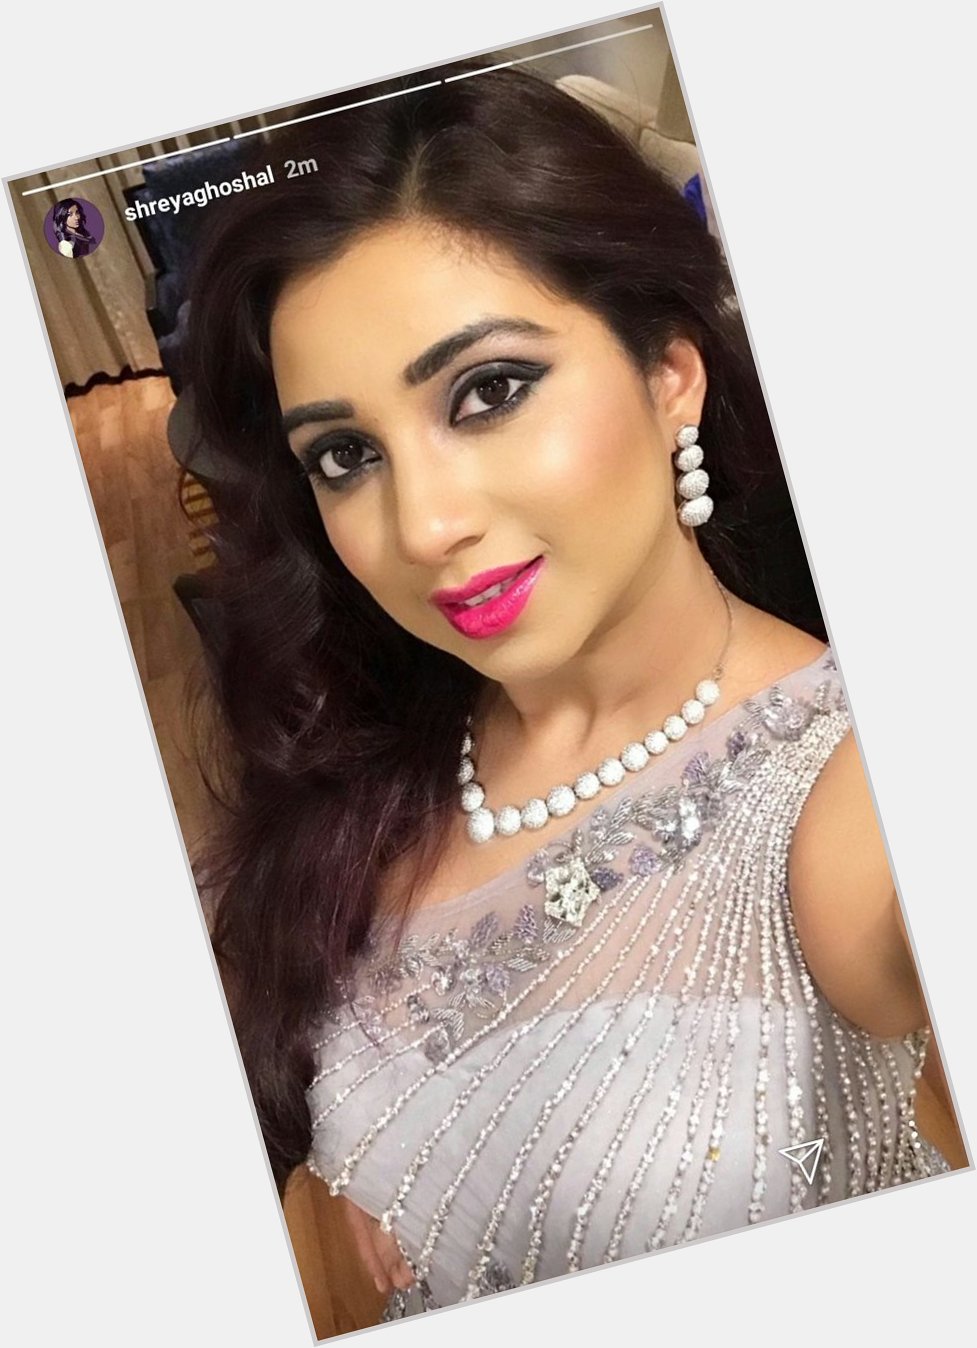 Happy Birthday Shreya Ghoshal !
God Bless You Mam! You are an inspiration to us and all:) 